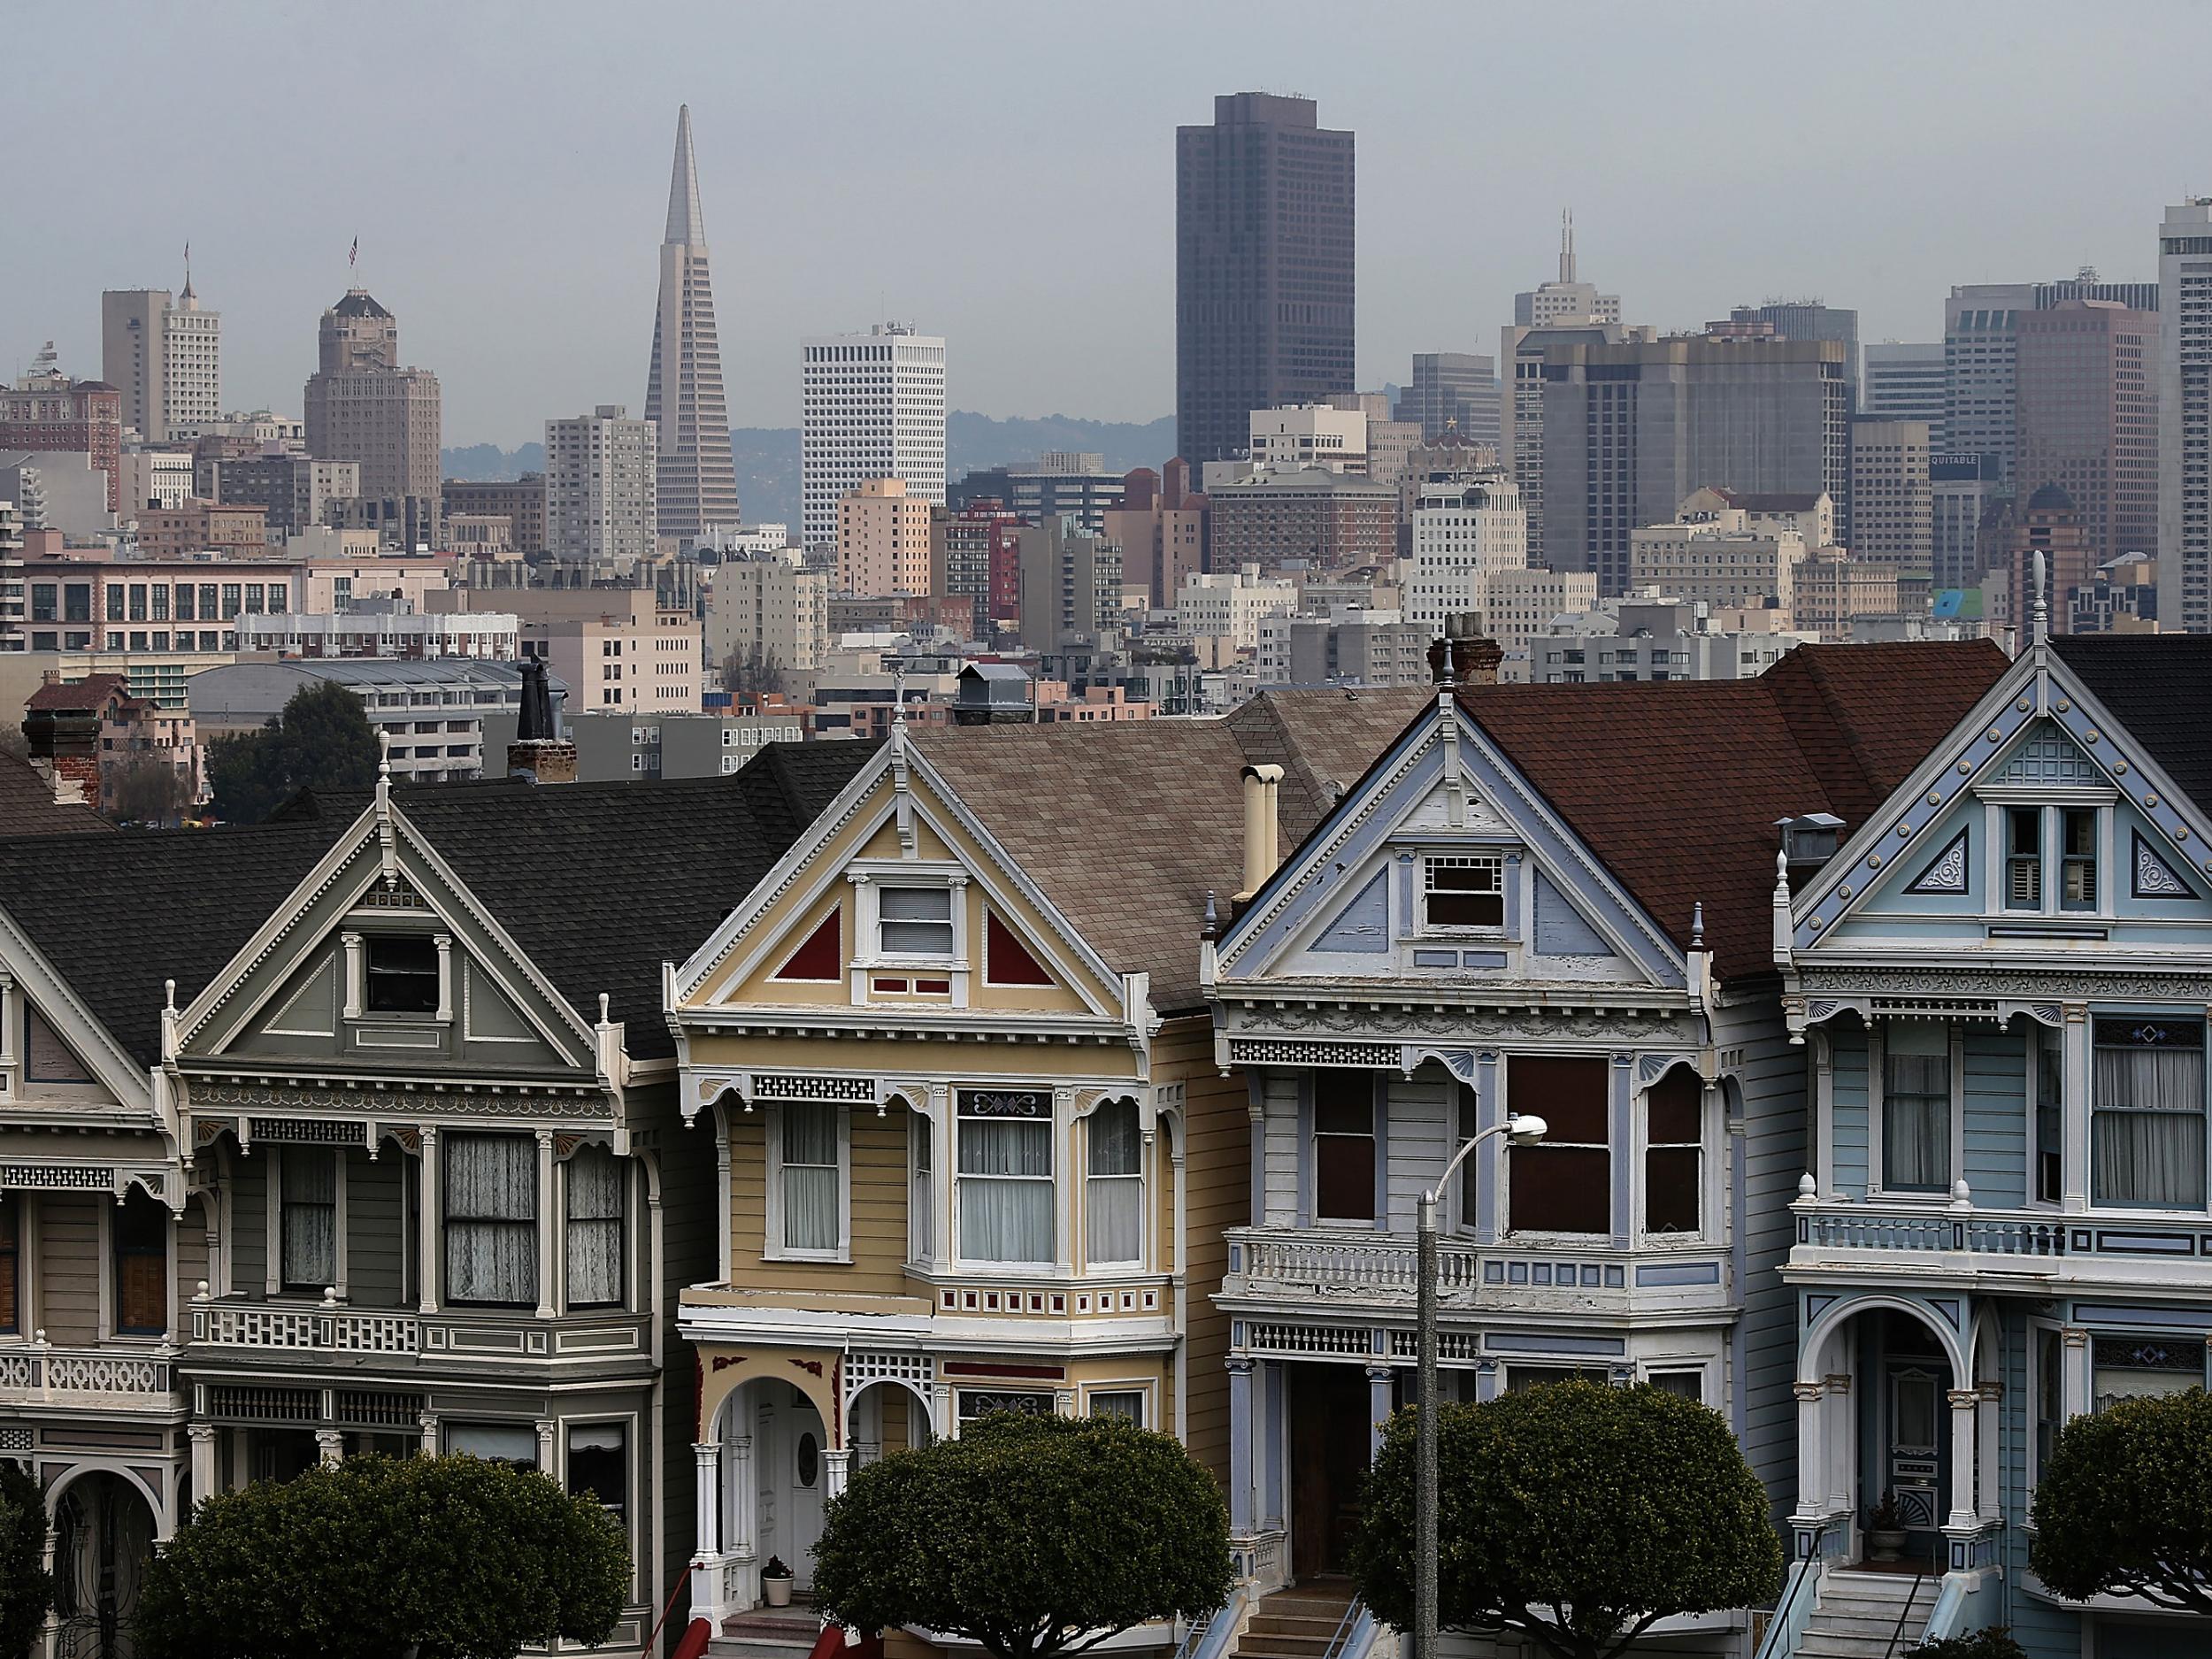 San Francisco, where Rentberry is based, is one of the most expensive places to rent in the US